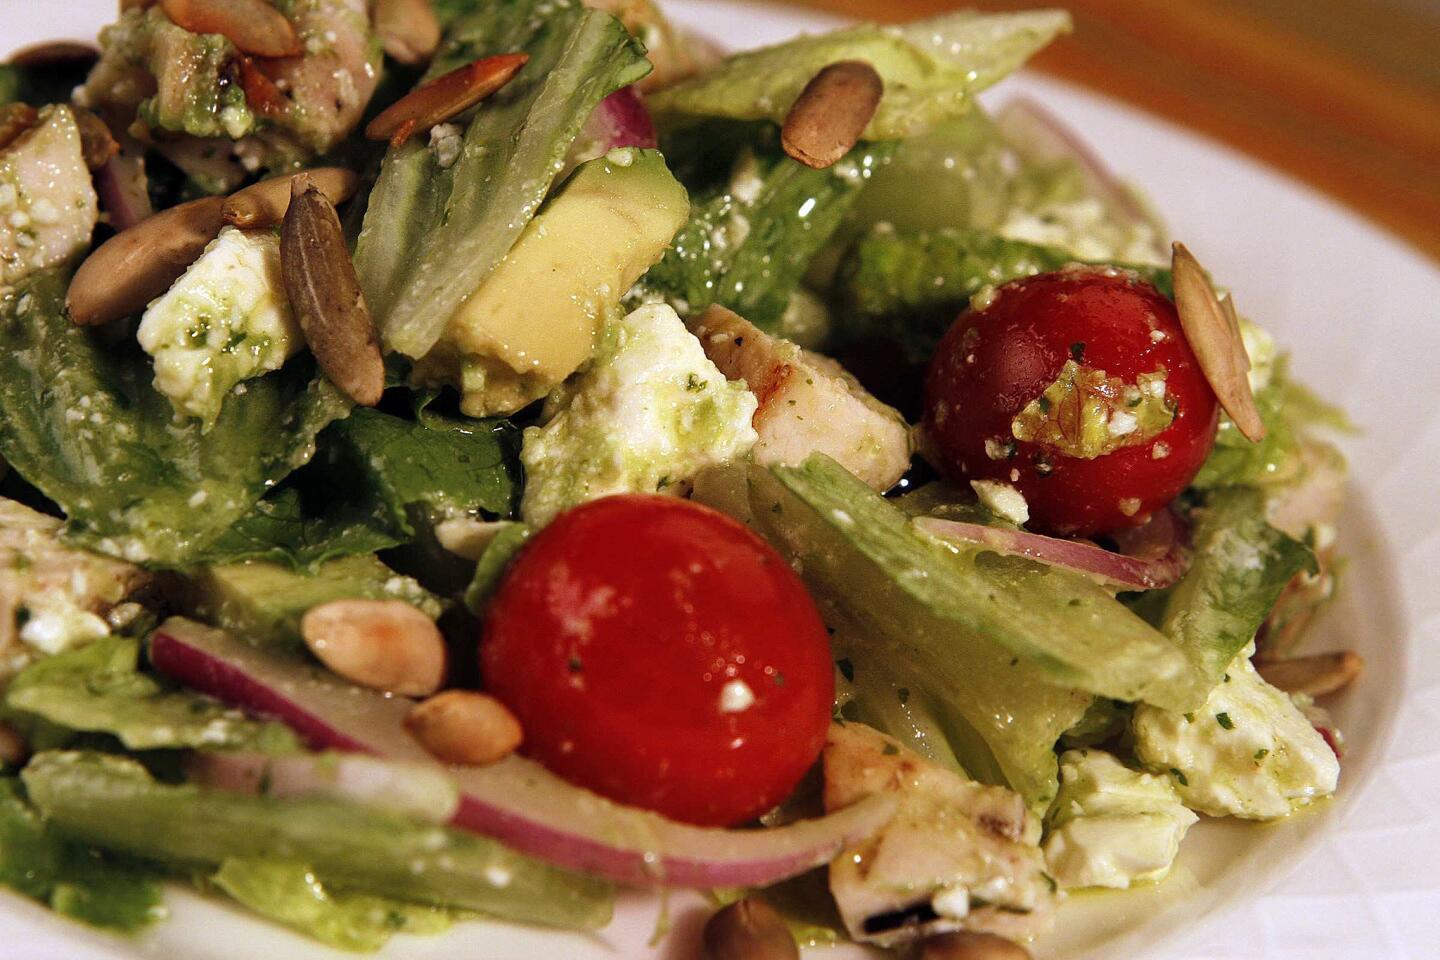 Bluewater Grill's chicken chopped salad with avocado dressing and pepitas